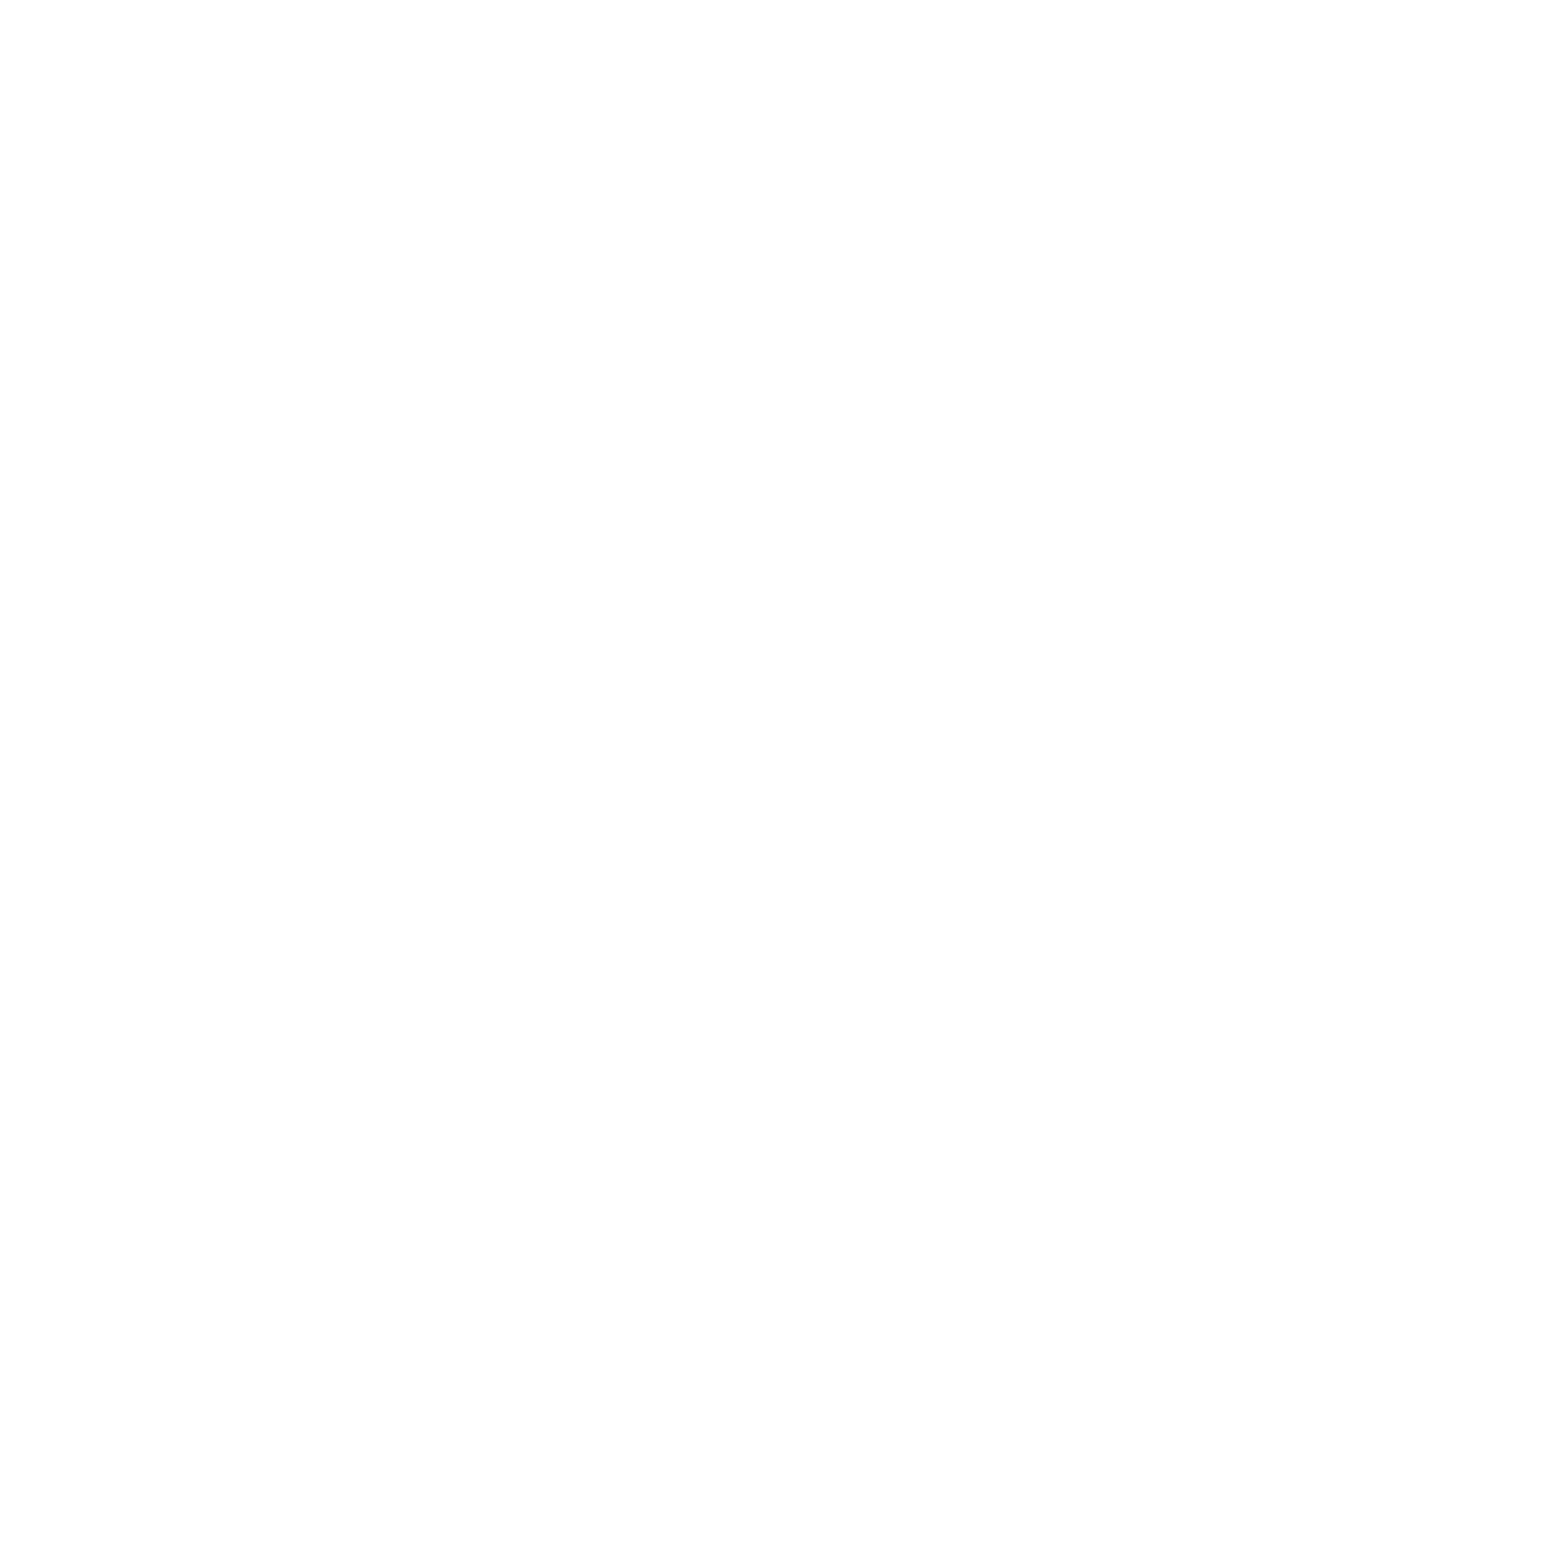 Swiss Re logo for dark backgrounds (transparent PNG)